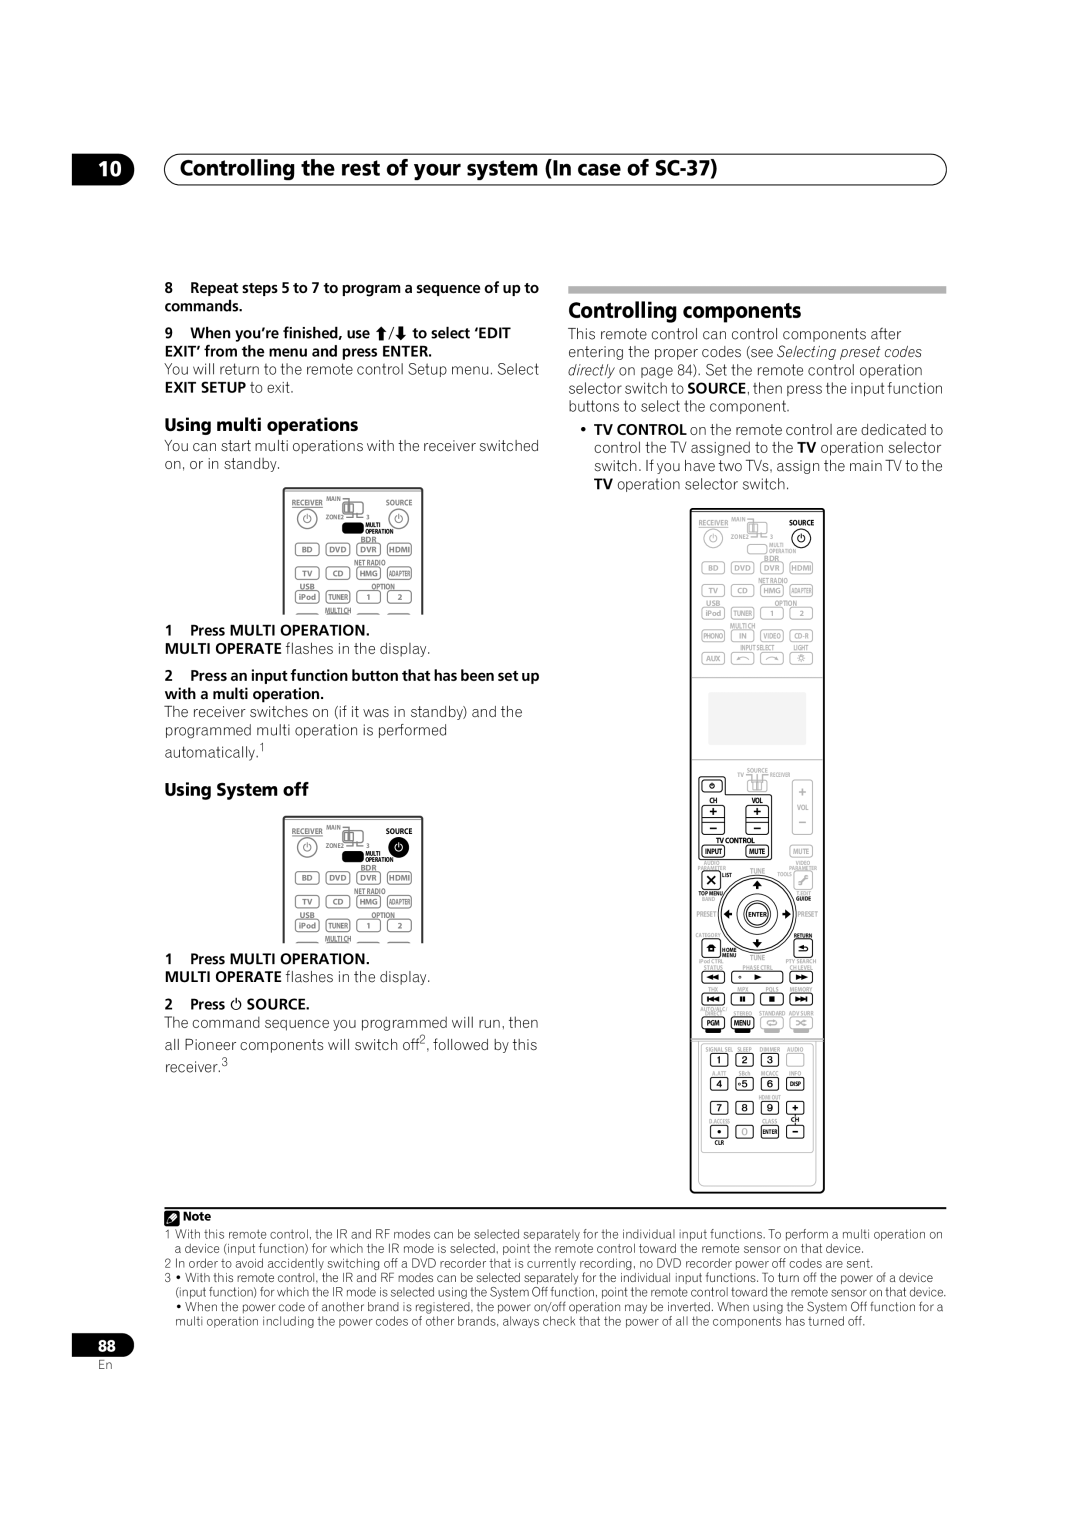 Pioneer SC-35 manual Controlling components, Using multi operations, Using System off 